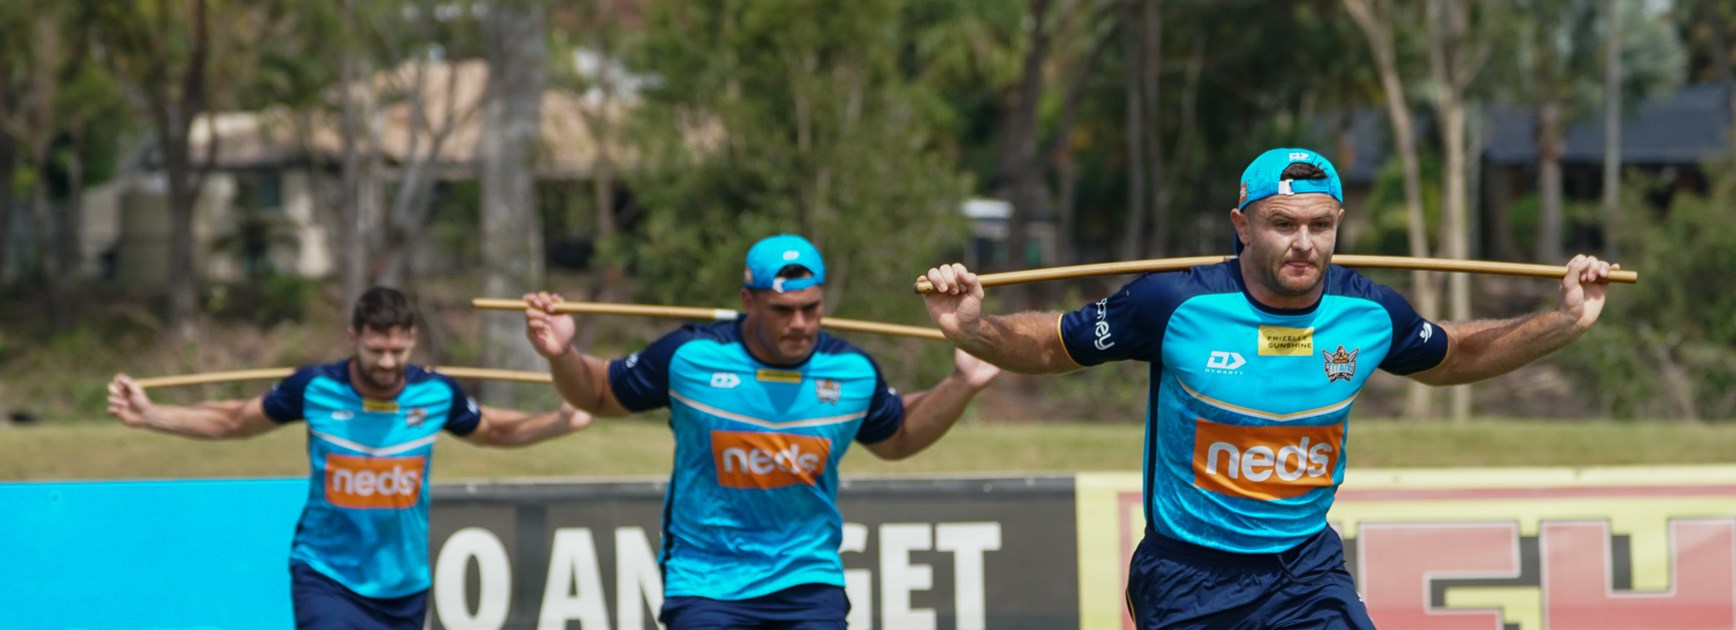 Titans senior group hit training paddock early for 2021